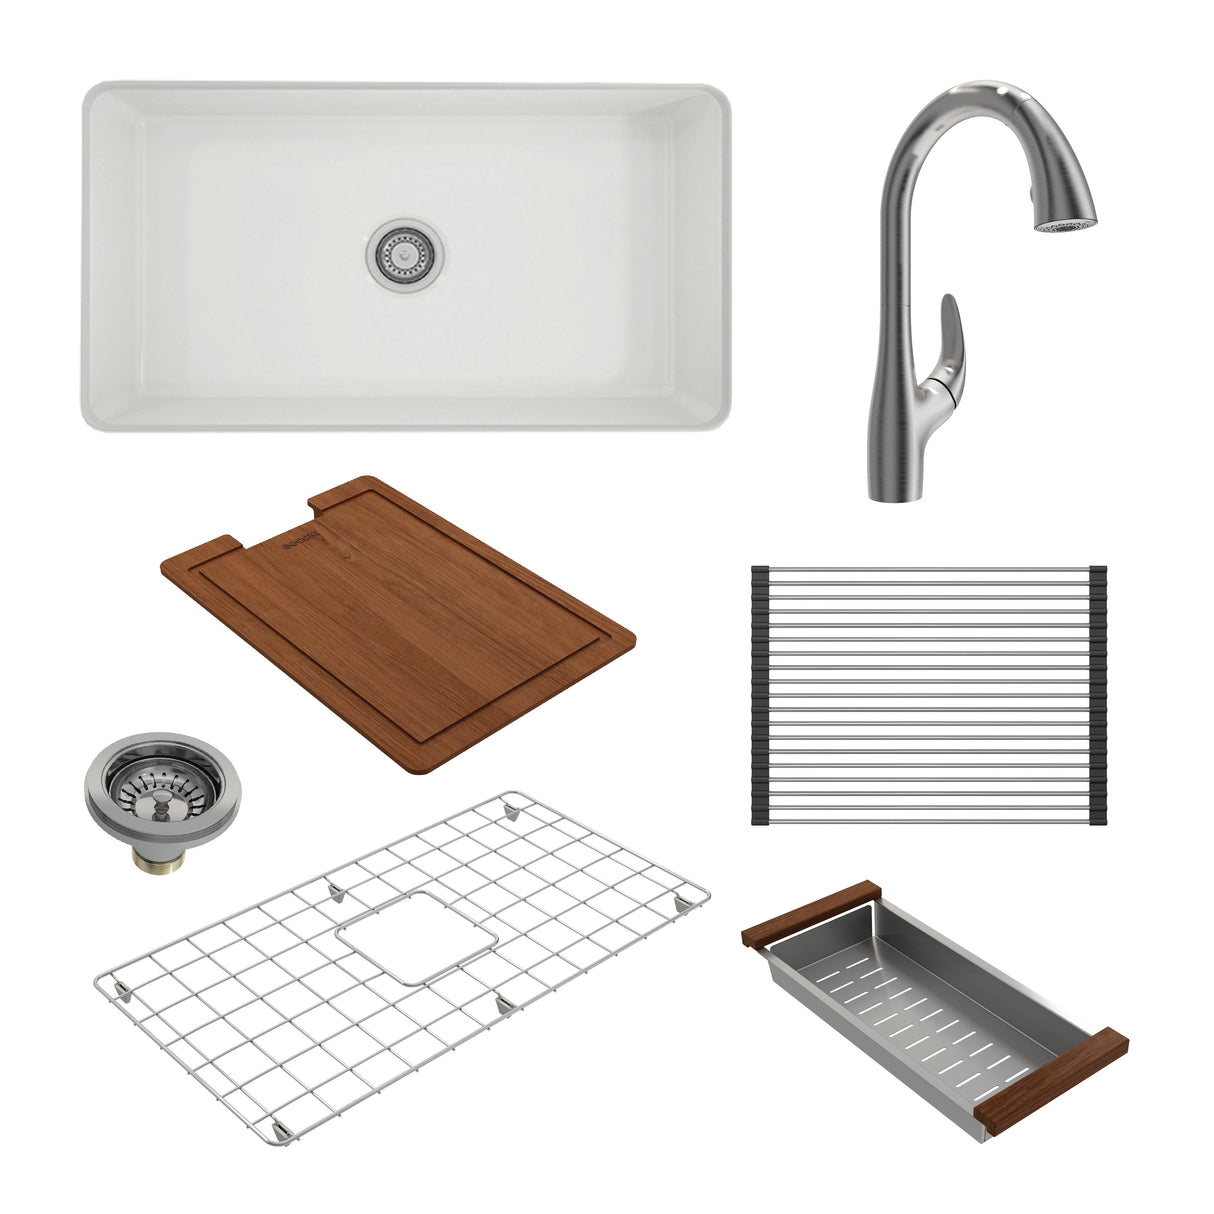 BOCCHI 1362-001-2024CH Kit: 1362 Sotto Dual-mount Fireclay 32 in. Single Bowl Kitchen Sink with Protective Bottom Grid and Strainer & Workstation Accessories w/ Pagano 2.0 Faucet